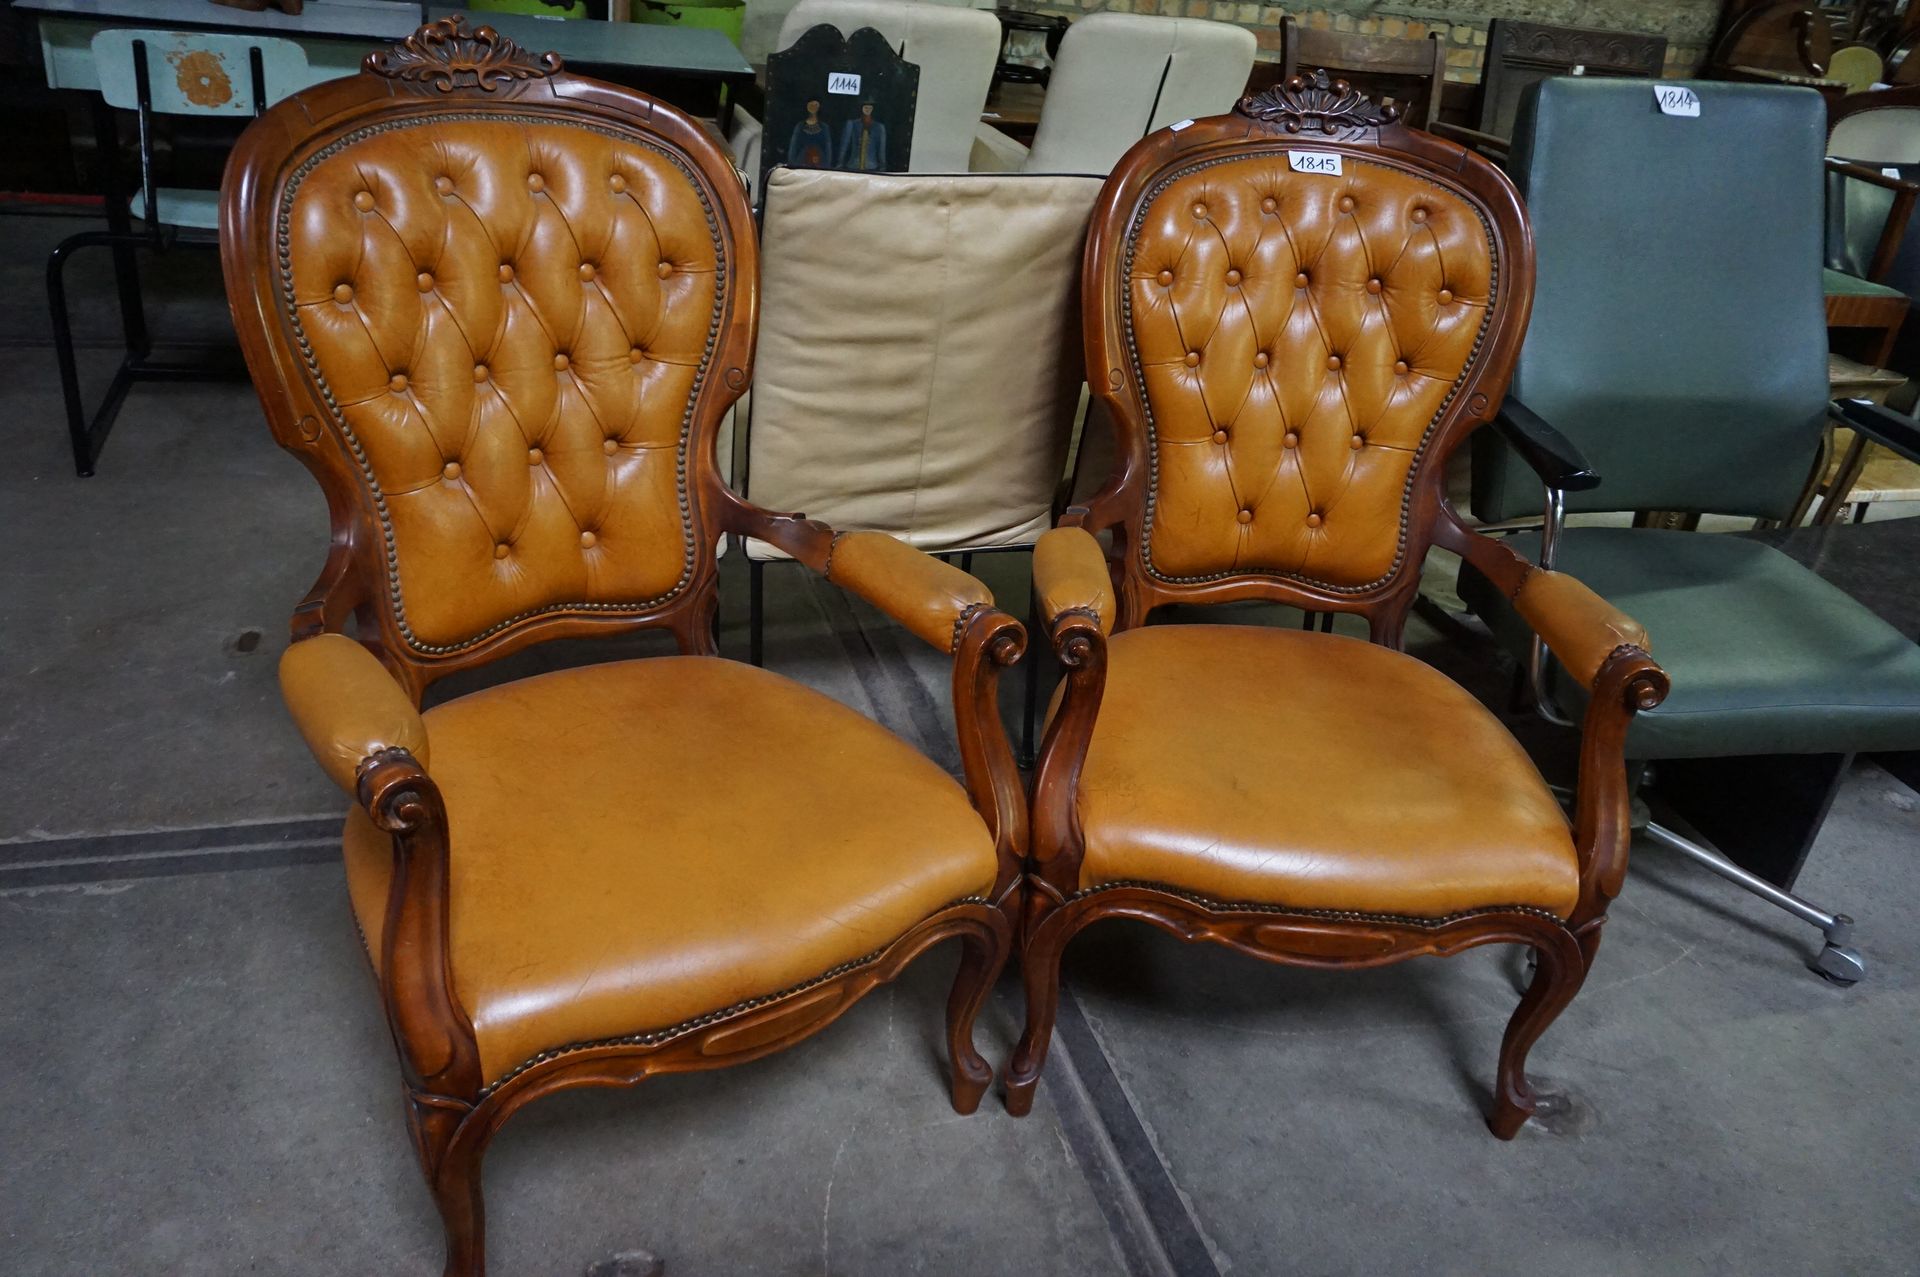 Null 2 Armchairs in mahogany - Upholstered in leather